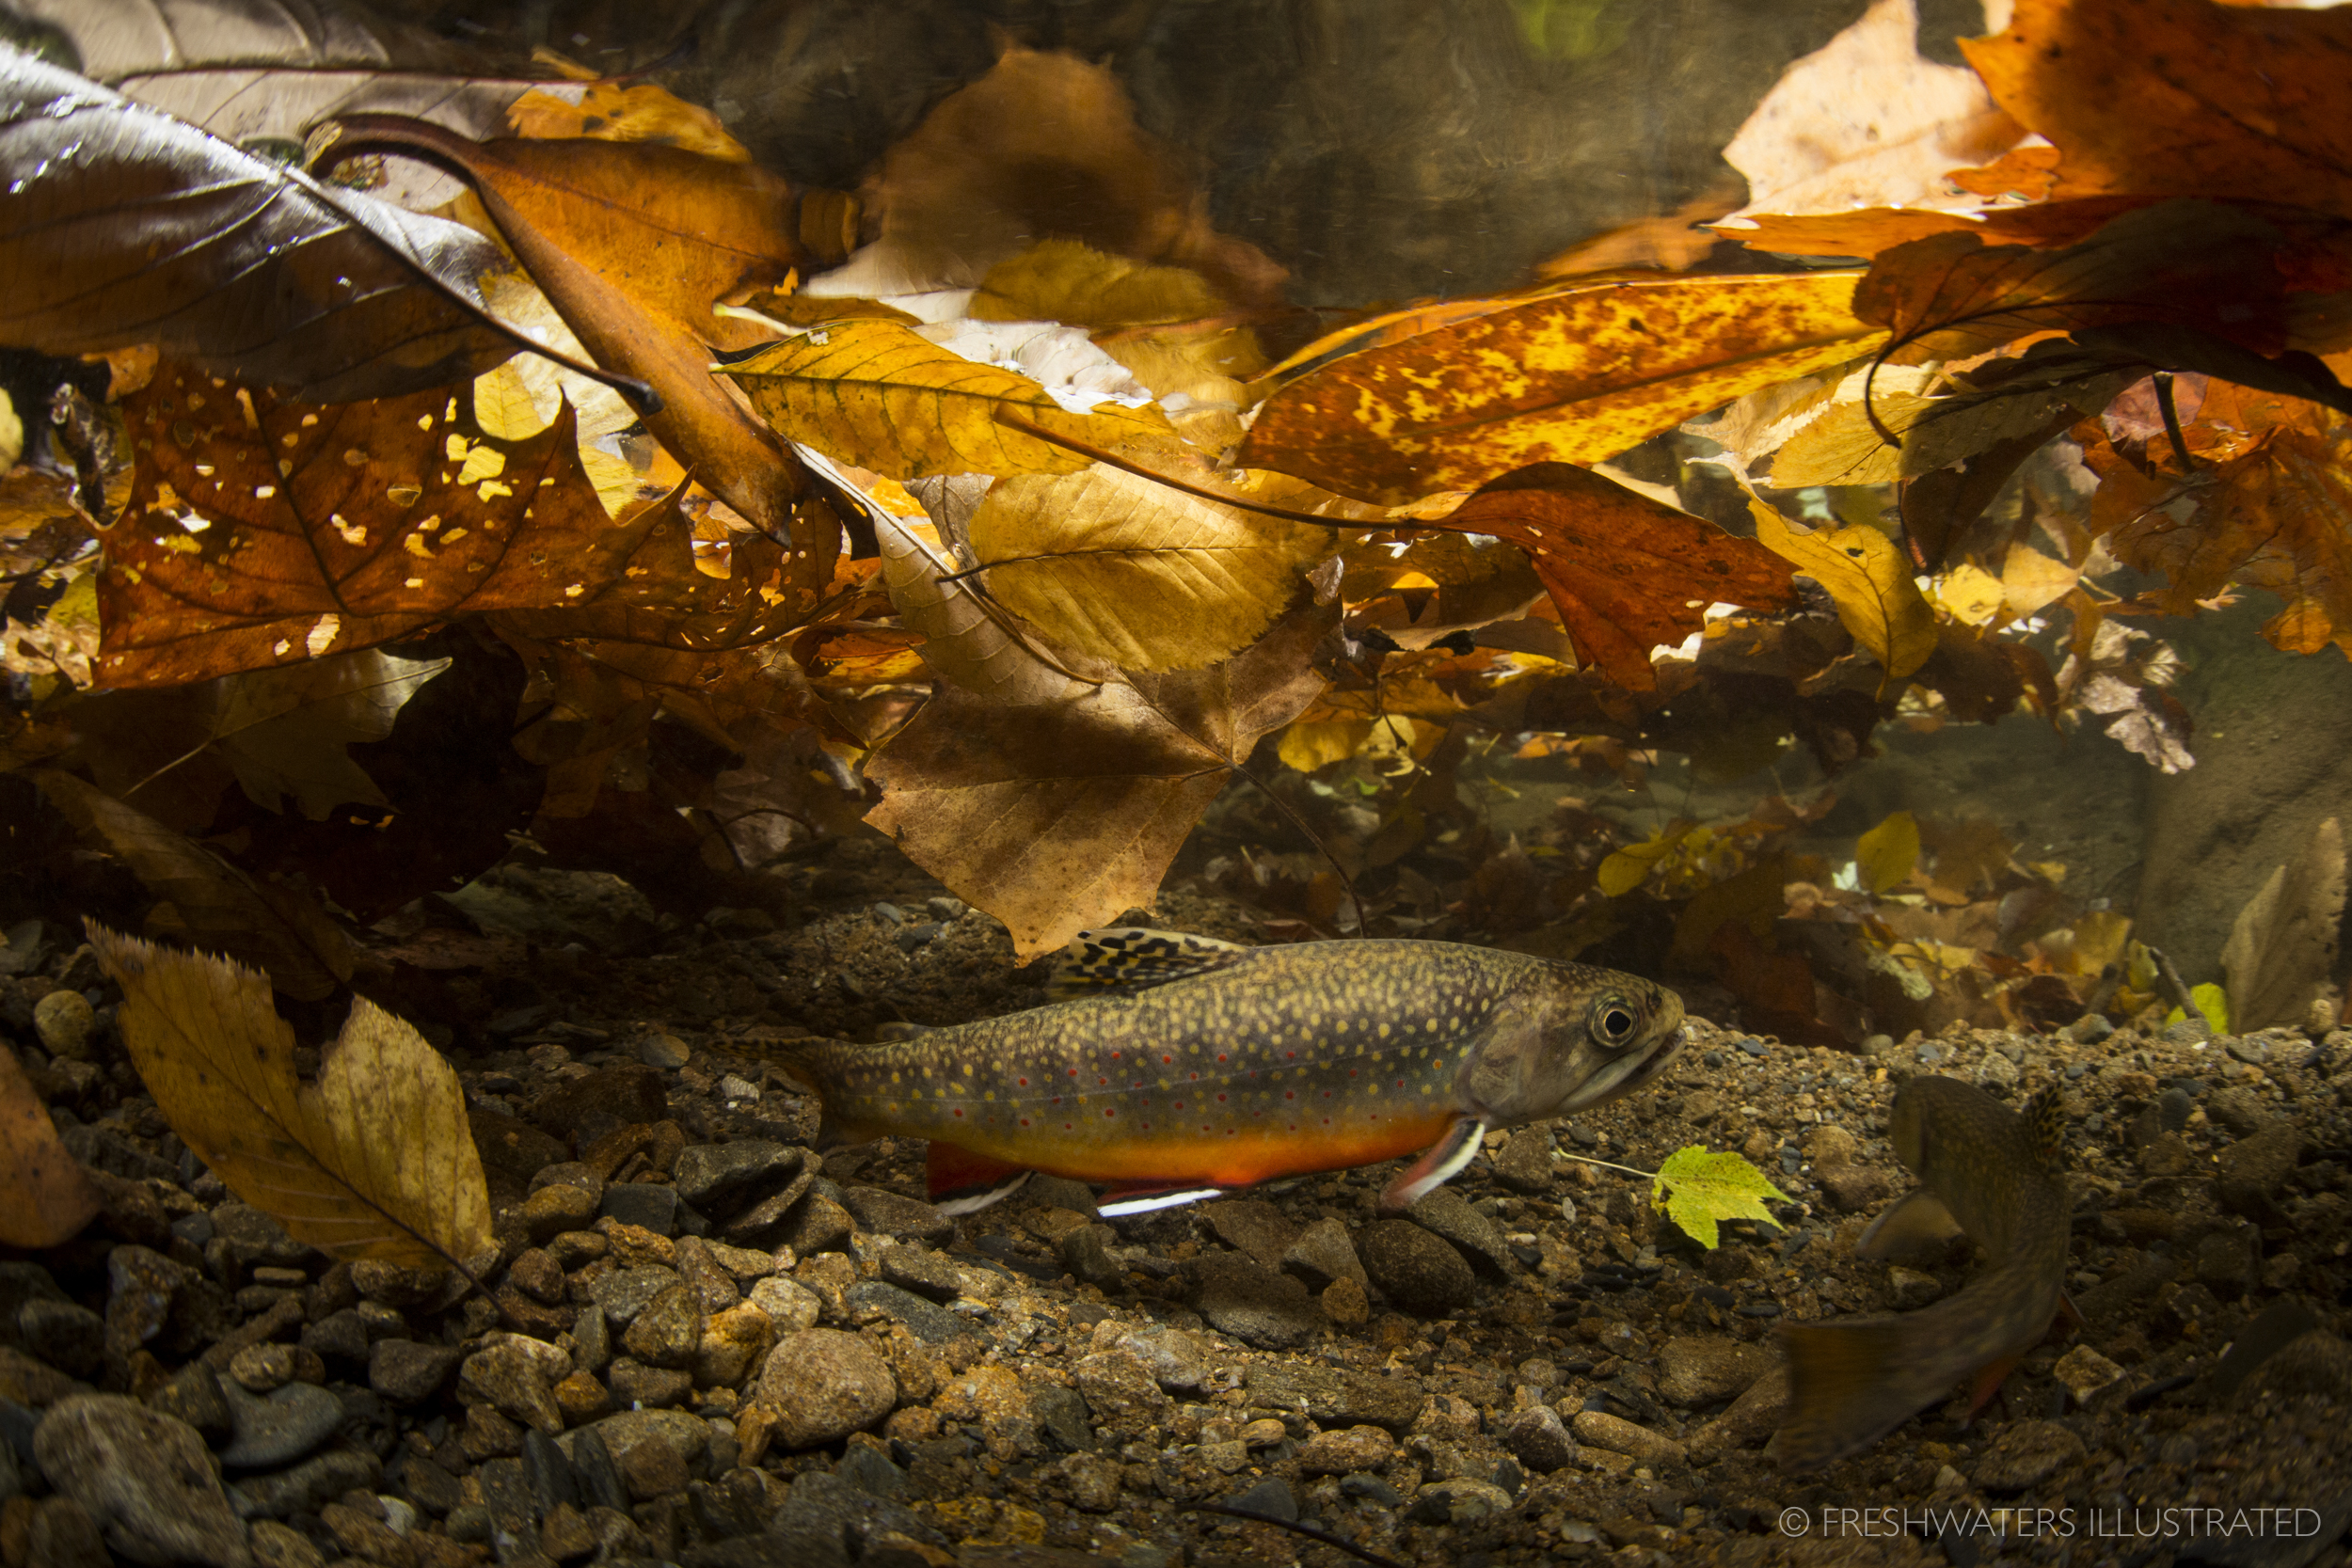  Hidden beneath a layer of freshly fallen leaves a pair of Southern Appalachian brook trout perform their annual mating courtship in the Great Smoky Mountains National Park. Nearly wiped out, these iconic fish are now making a comeback. Smoky Mountai